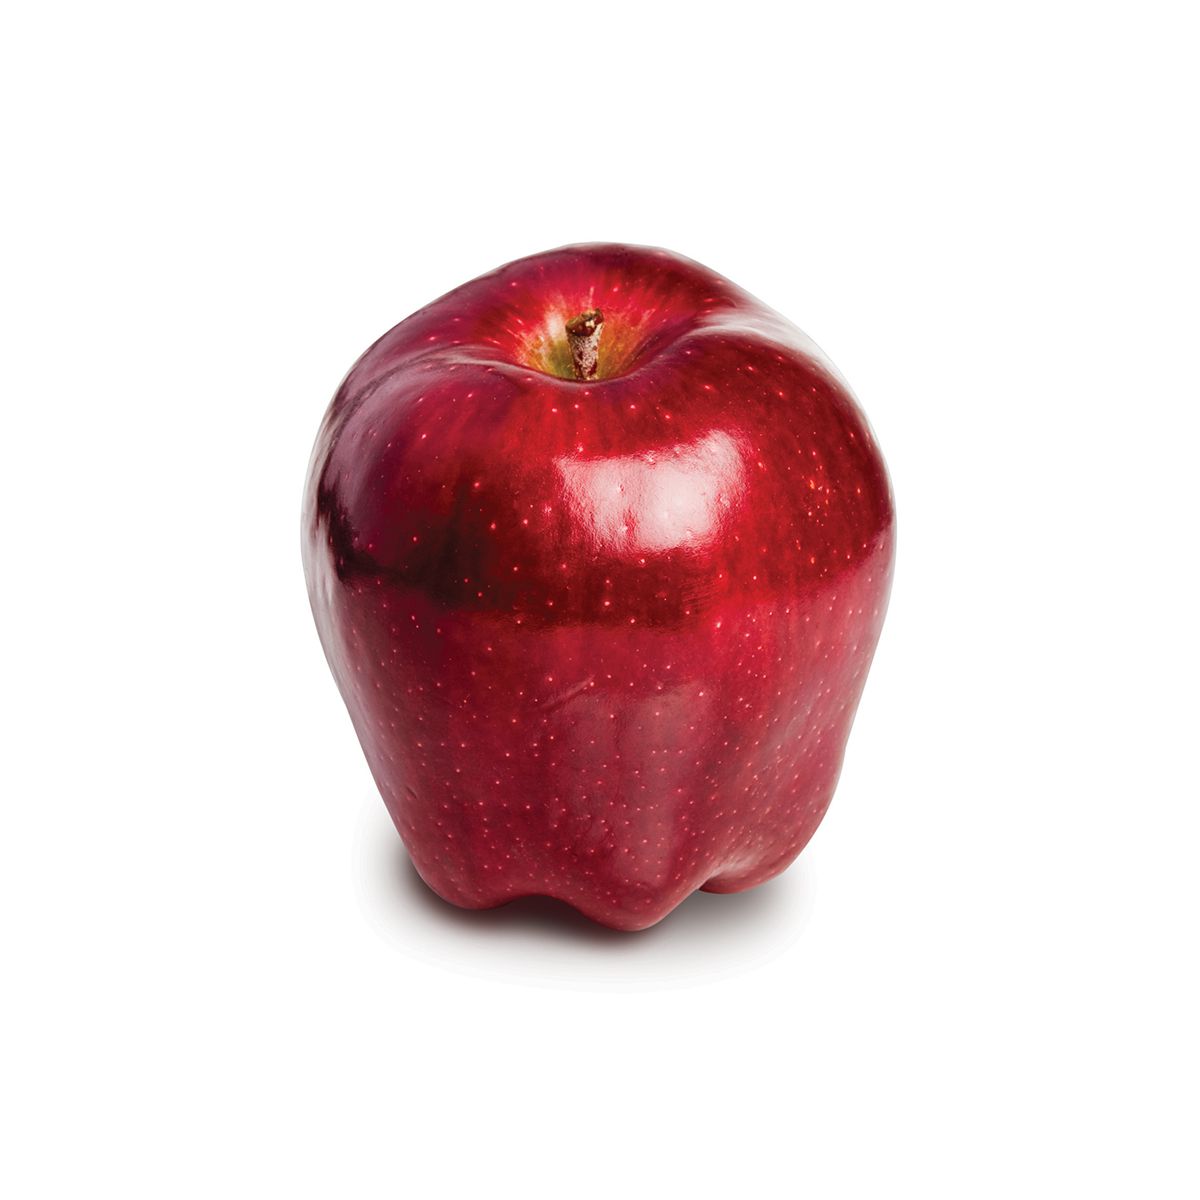 BoxNCase Red Delicious Apples